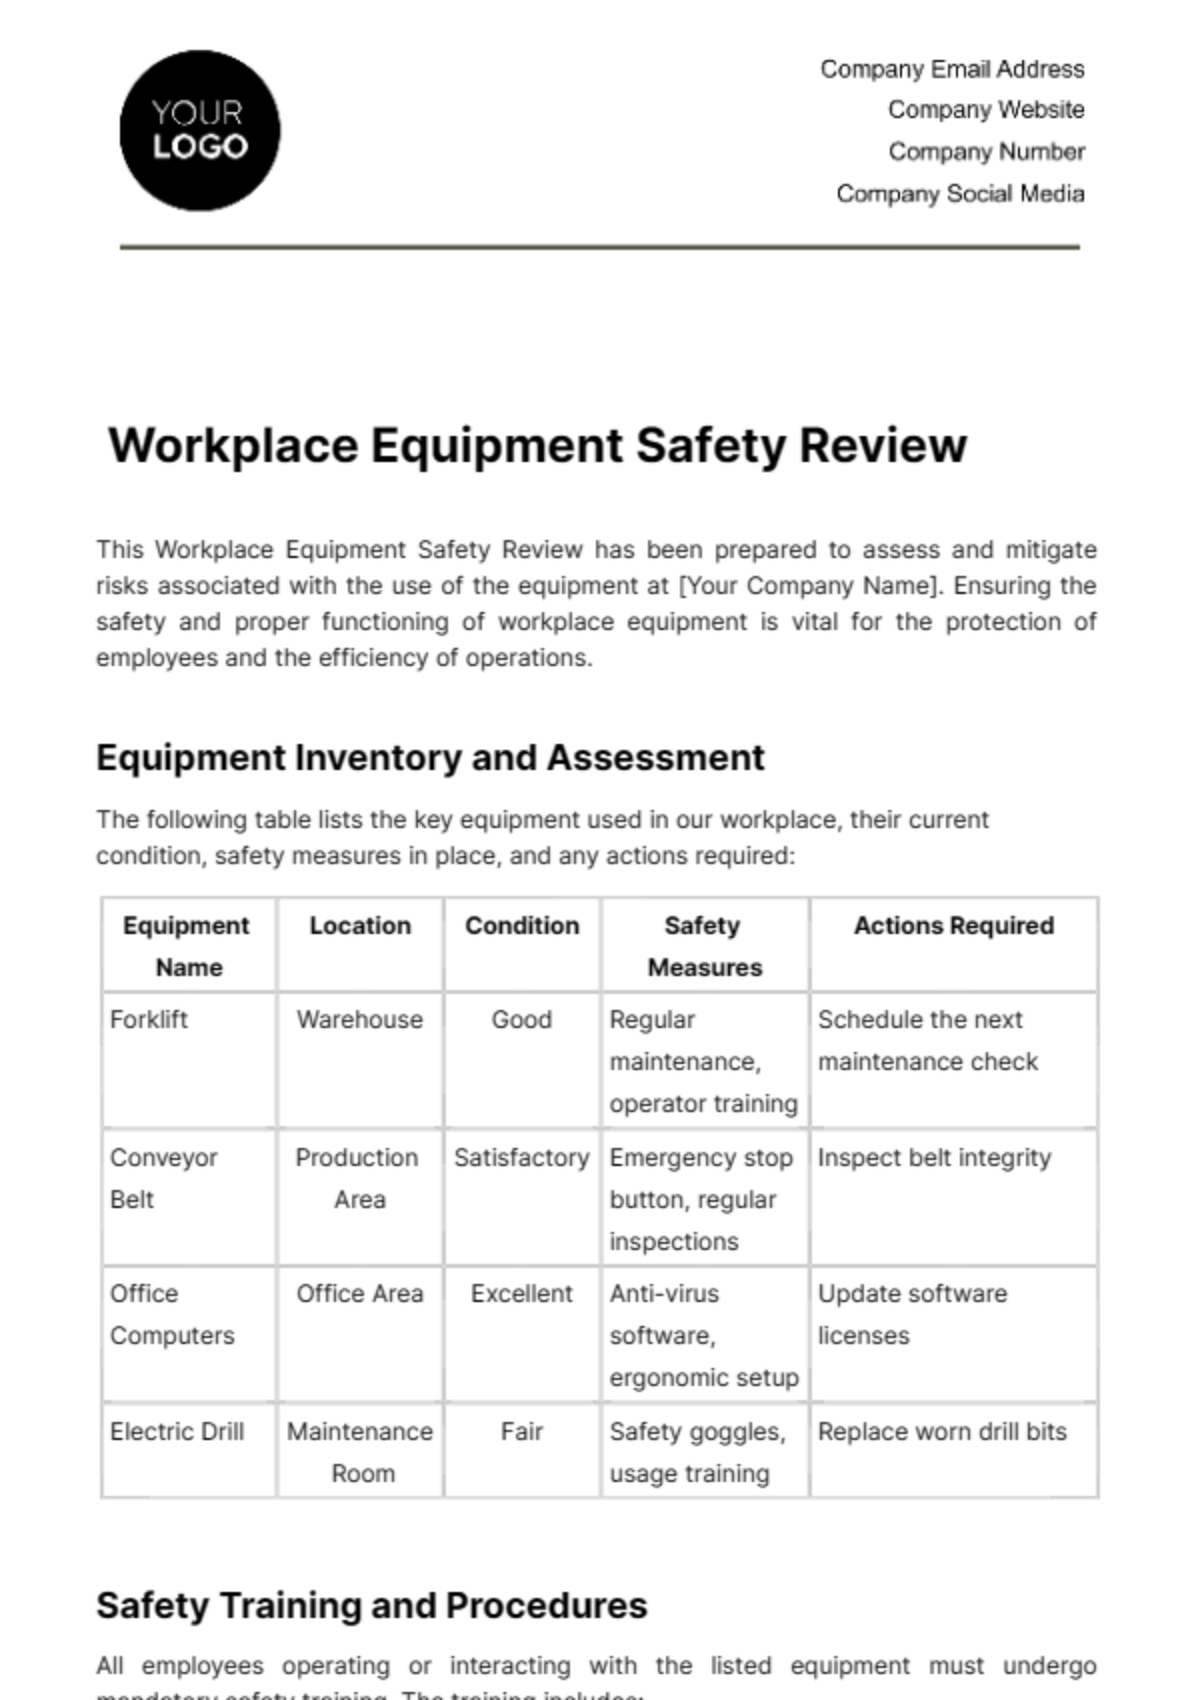 Workplace Equipment Safety Review Template